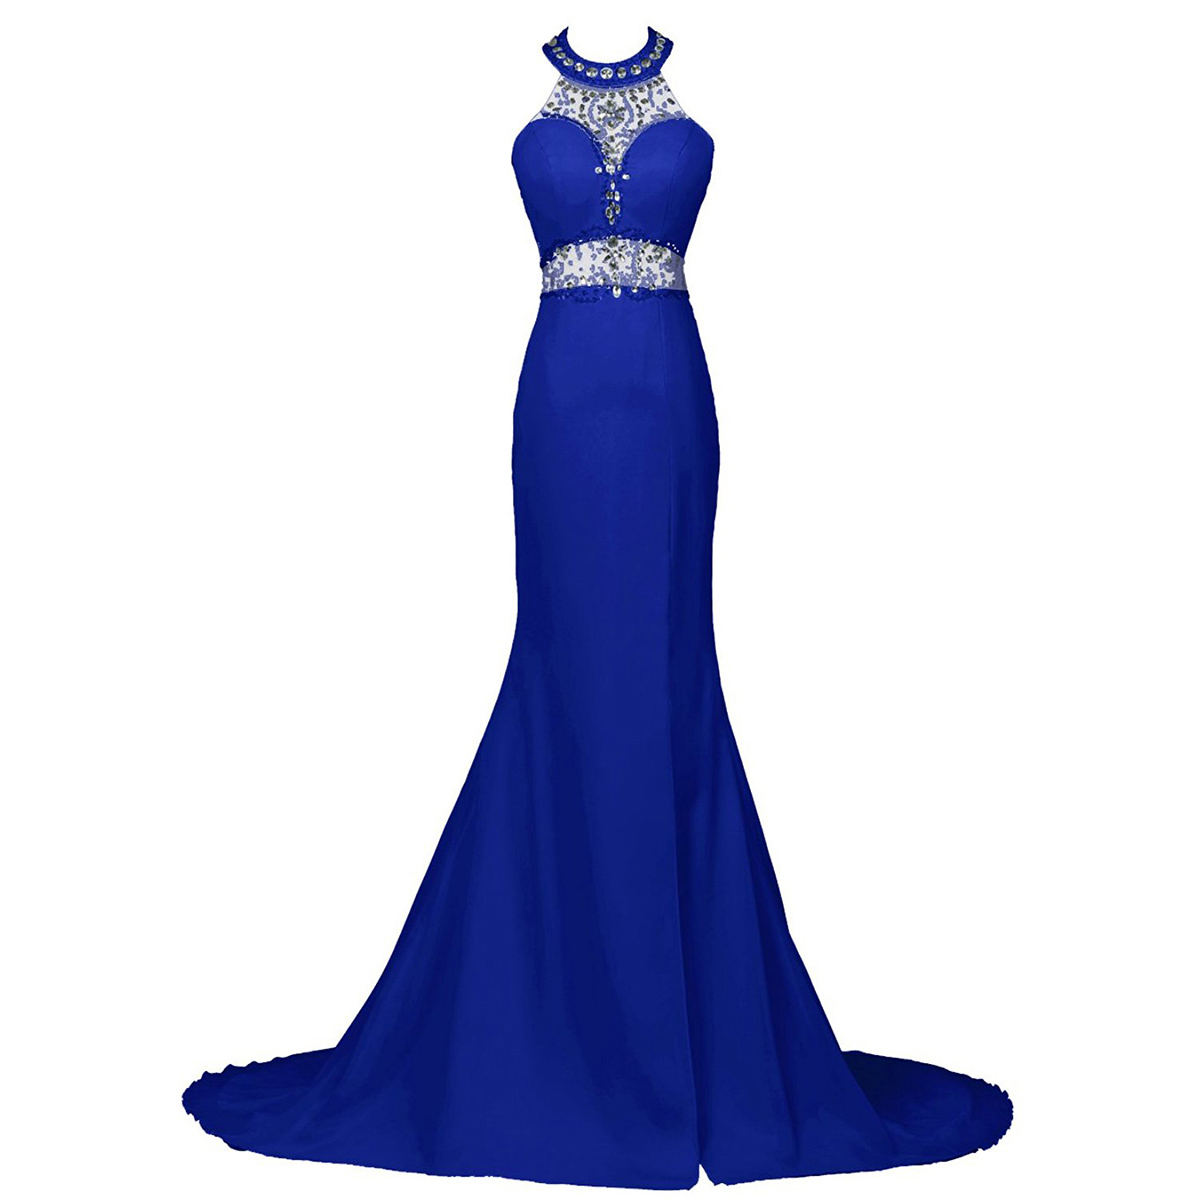 Sexy Beaded Halter Trumpet Prom Dress, Royal Blue Sequins Low Back Long Prom Dress, Front Split Sweep Train Chiffon Prom Dress